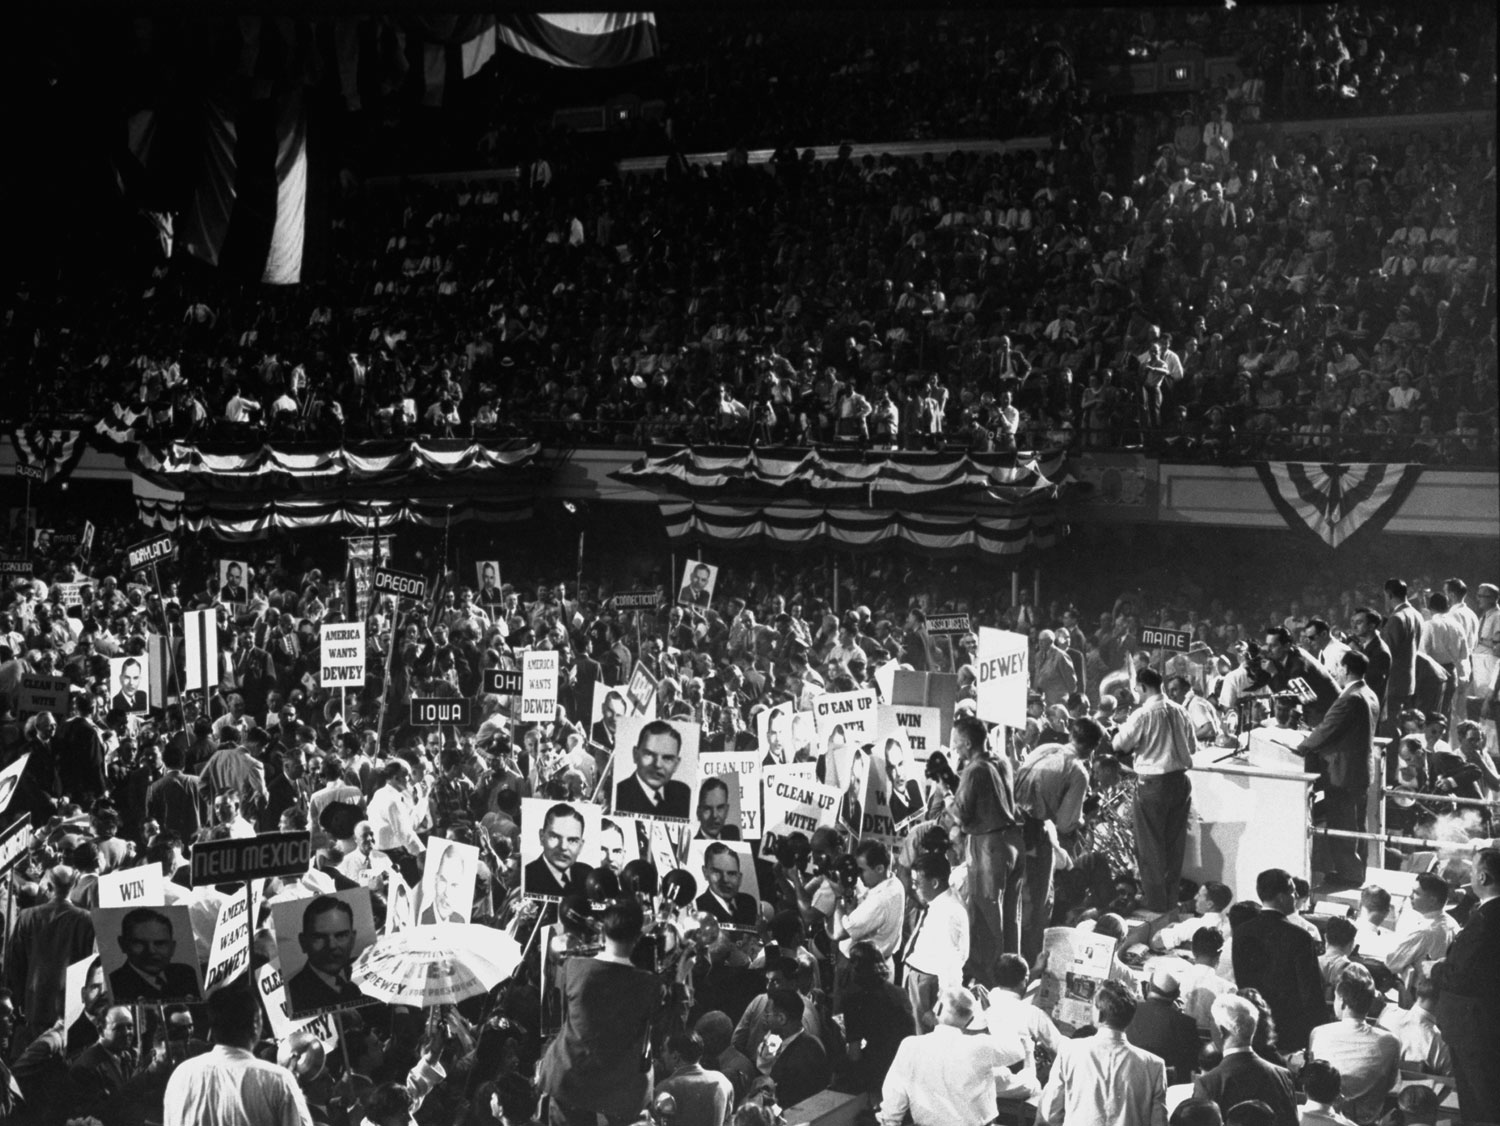 Scene at the 1948 GOP National Convention in Philadelphia.